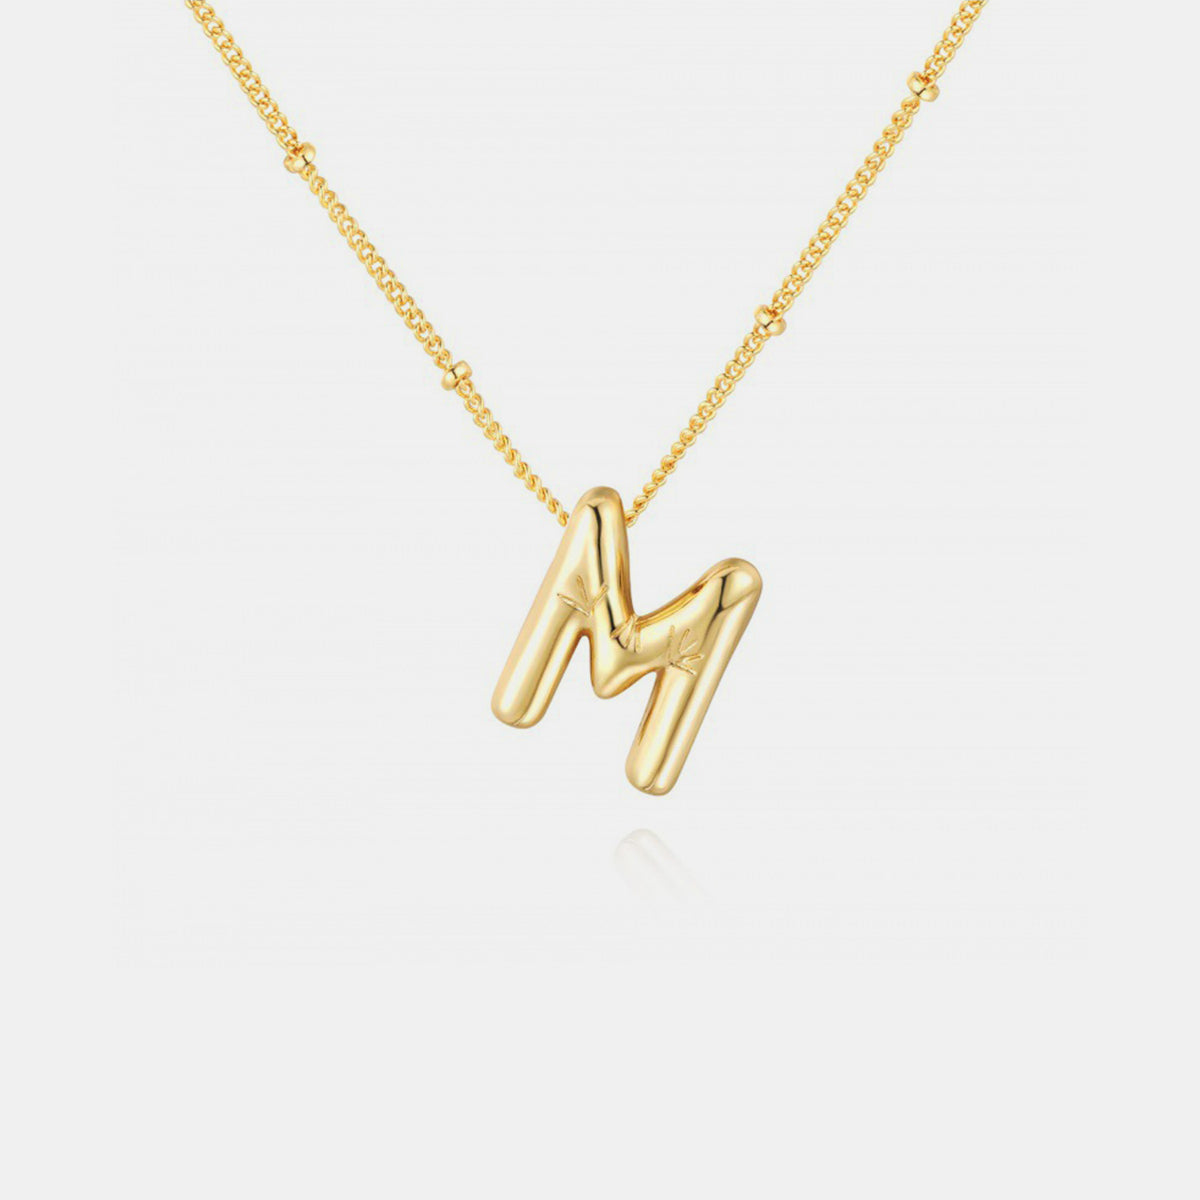 TEEK - K-S Gold-Plated Letter Pendant Necklace JEWELRY TEEK Trend Style M  